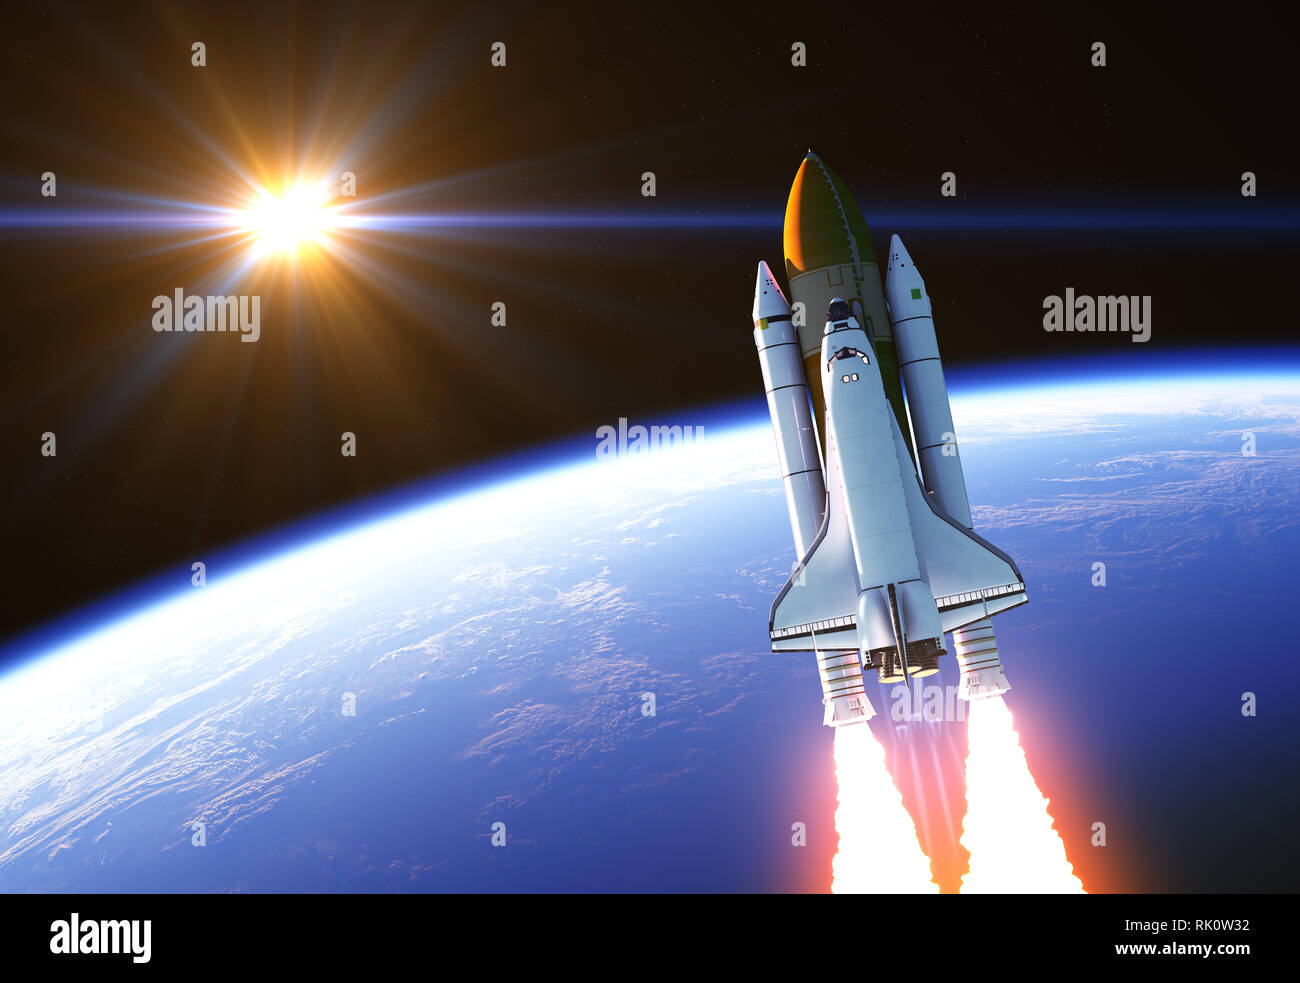 Space Shuttle In The Rays Of Sun. 3D Illustration. Stock Photo